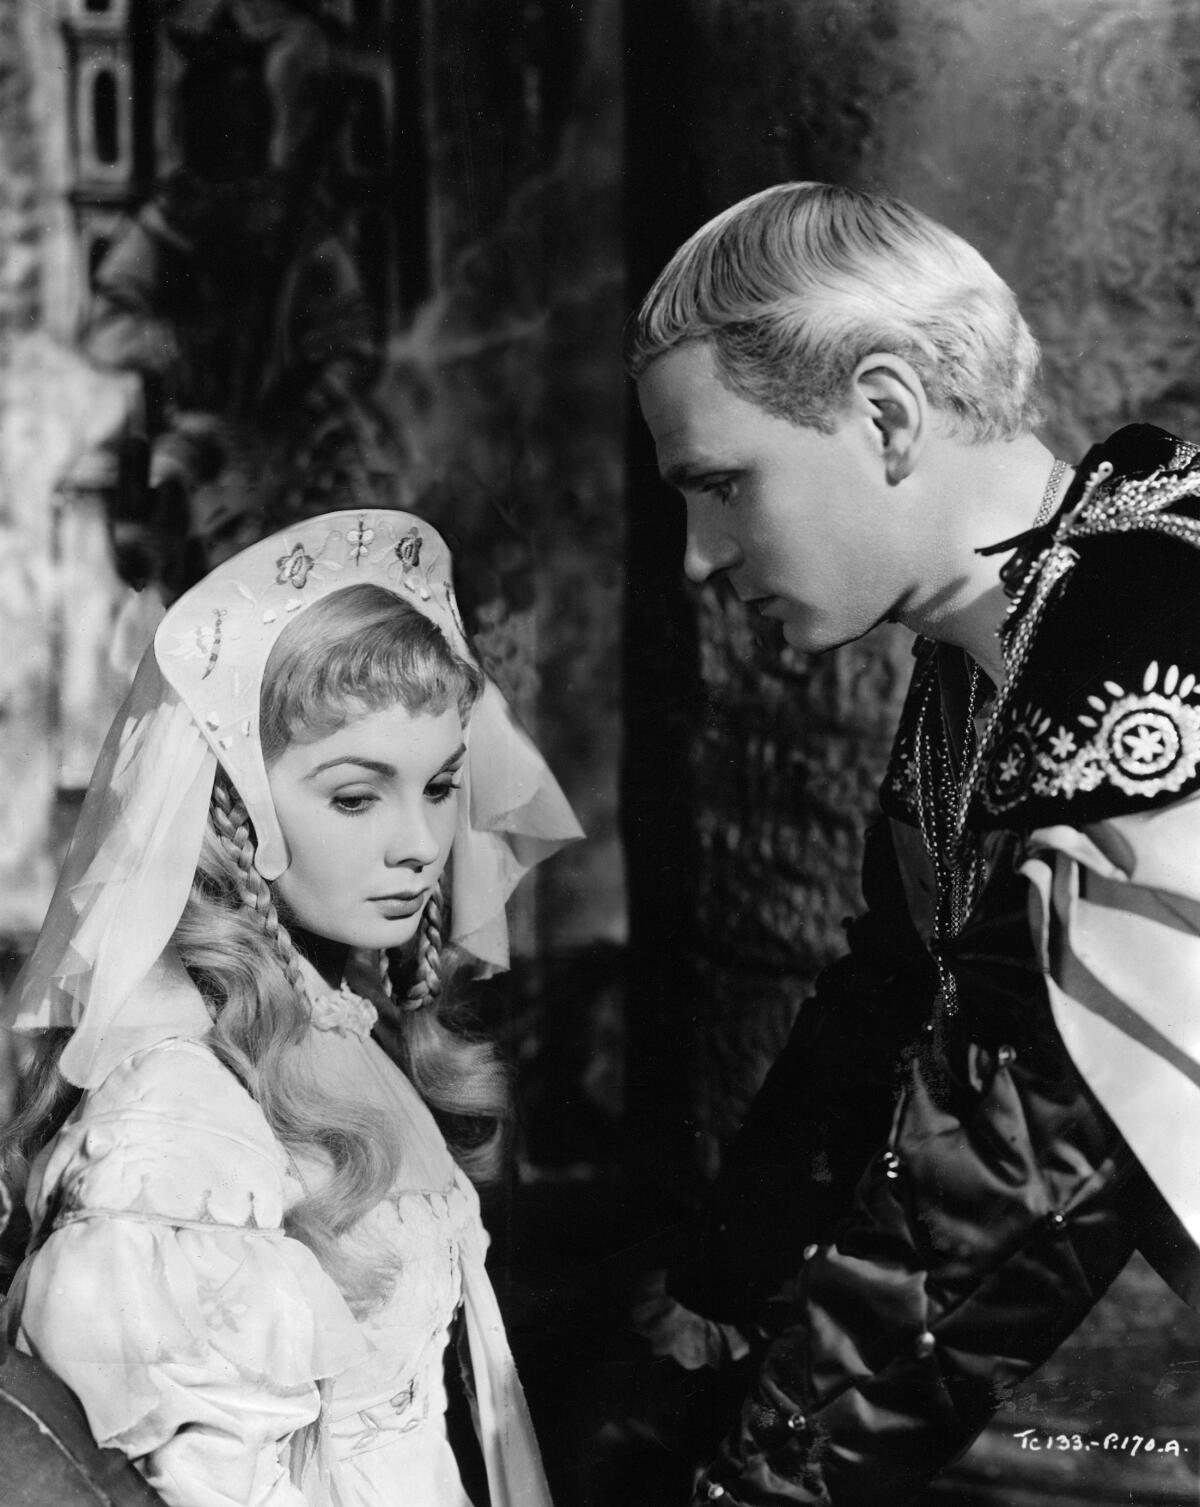 Jean Simmons and Laurence Olivier in "Hamlet" (1948)